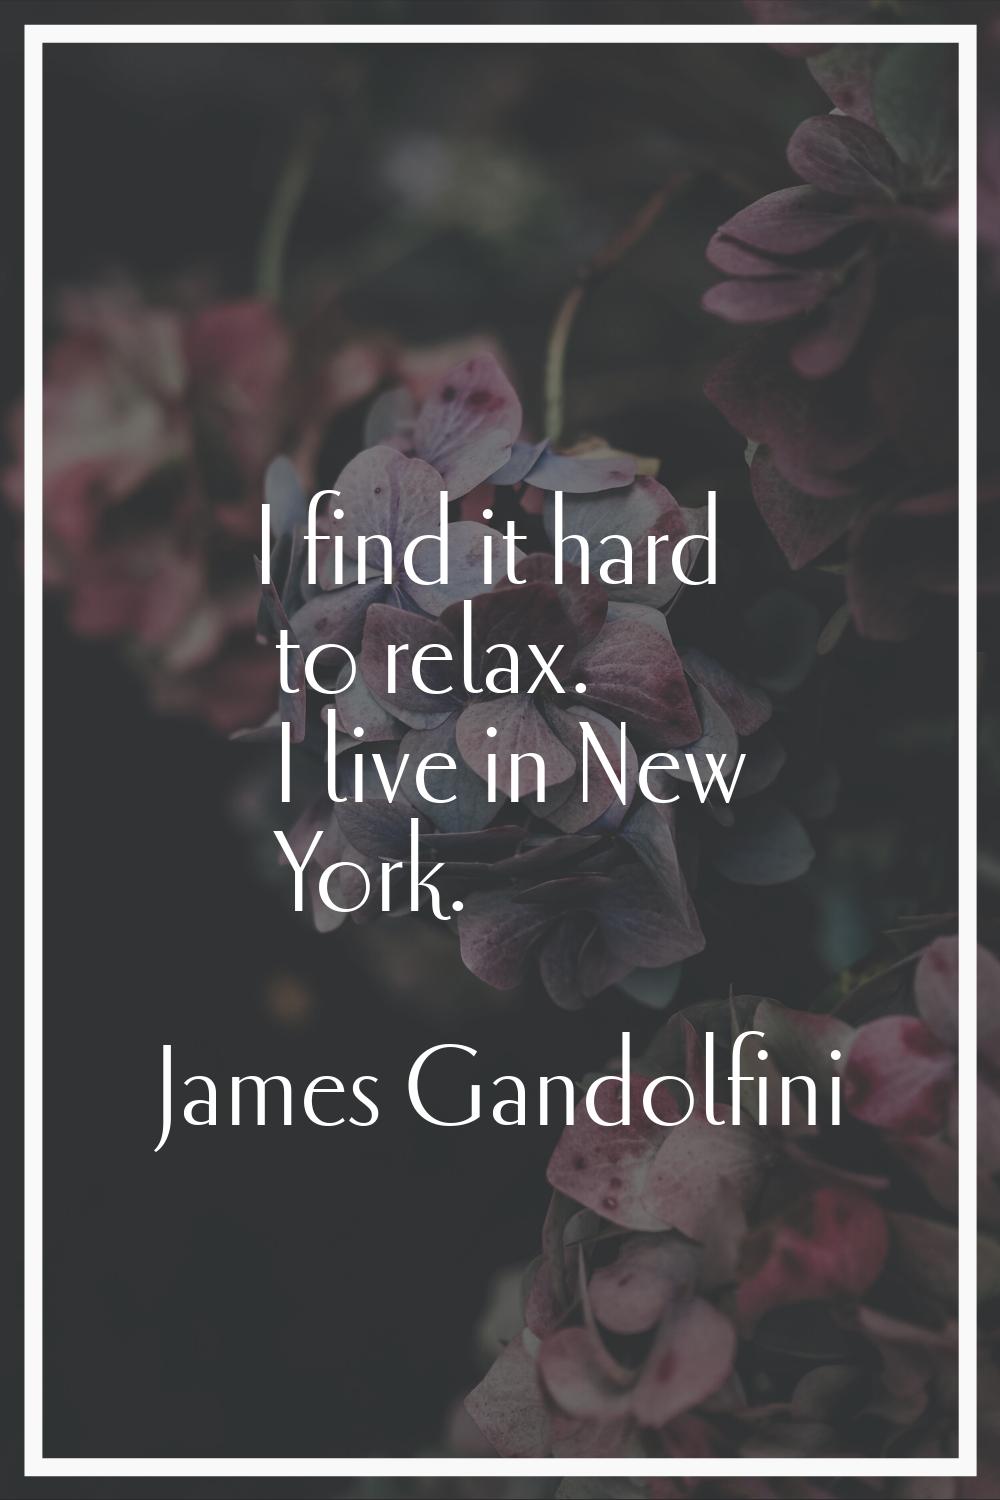 I find it hard to relax. I live in New York.